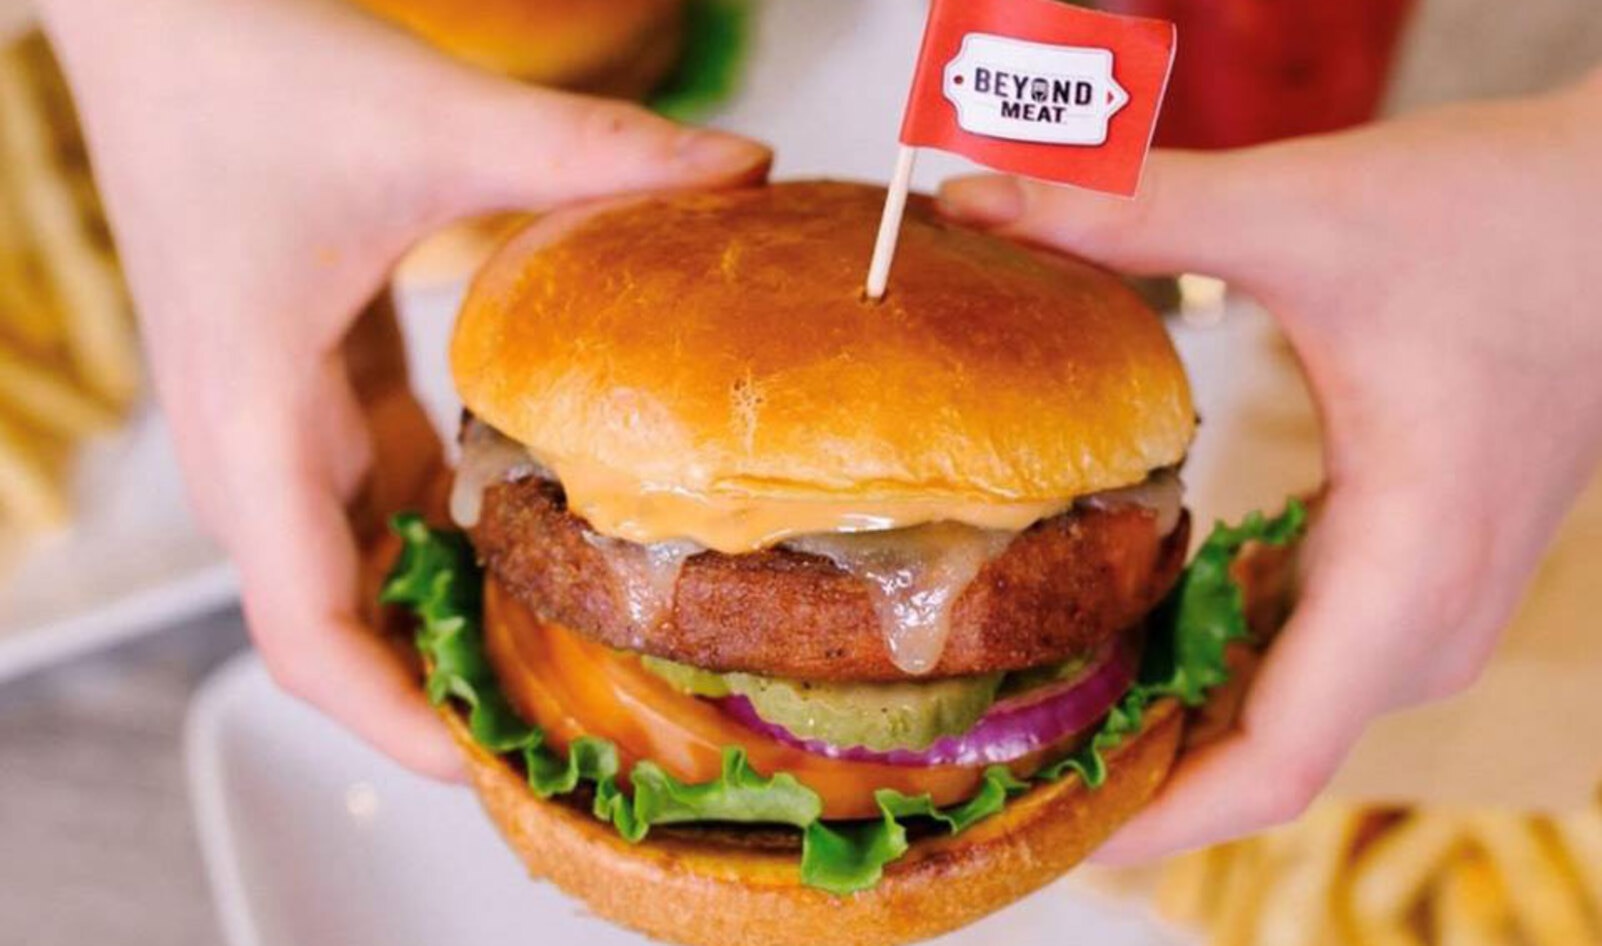 200-Year-Old Company Bunge Makes $135 Million with Beyond Meat Investment&nbsp;